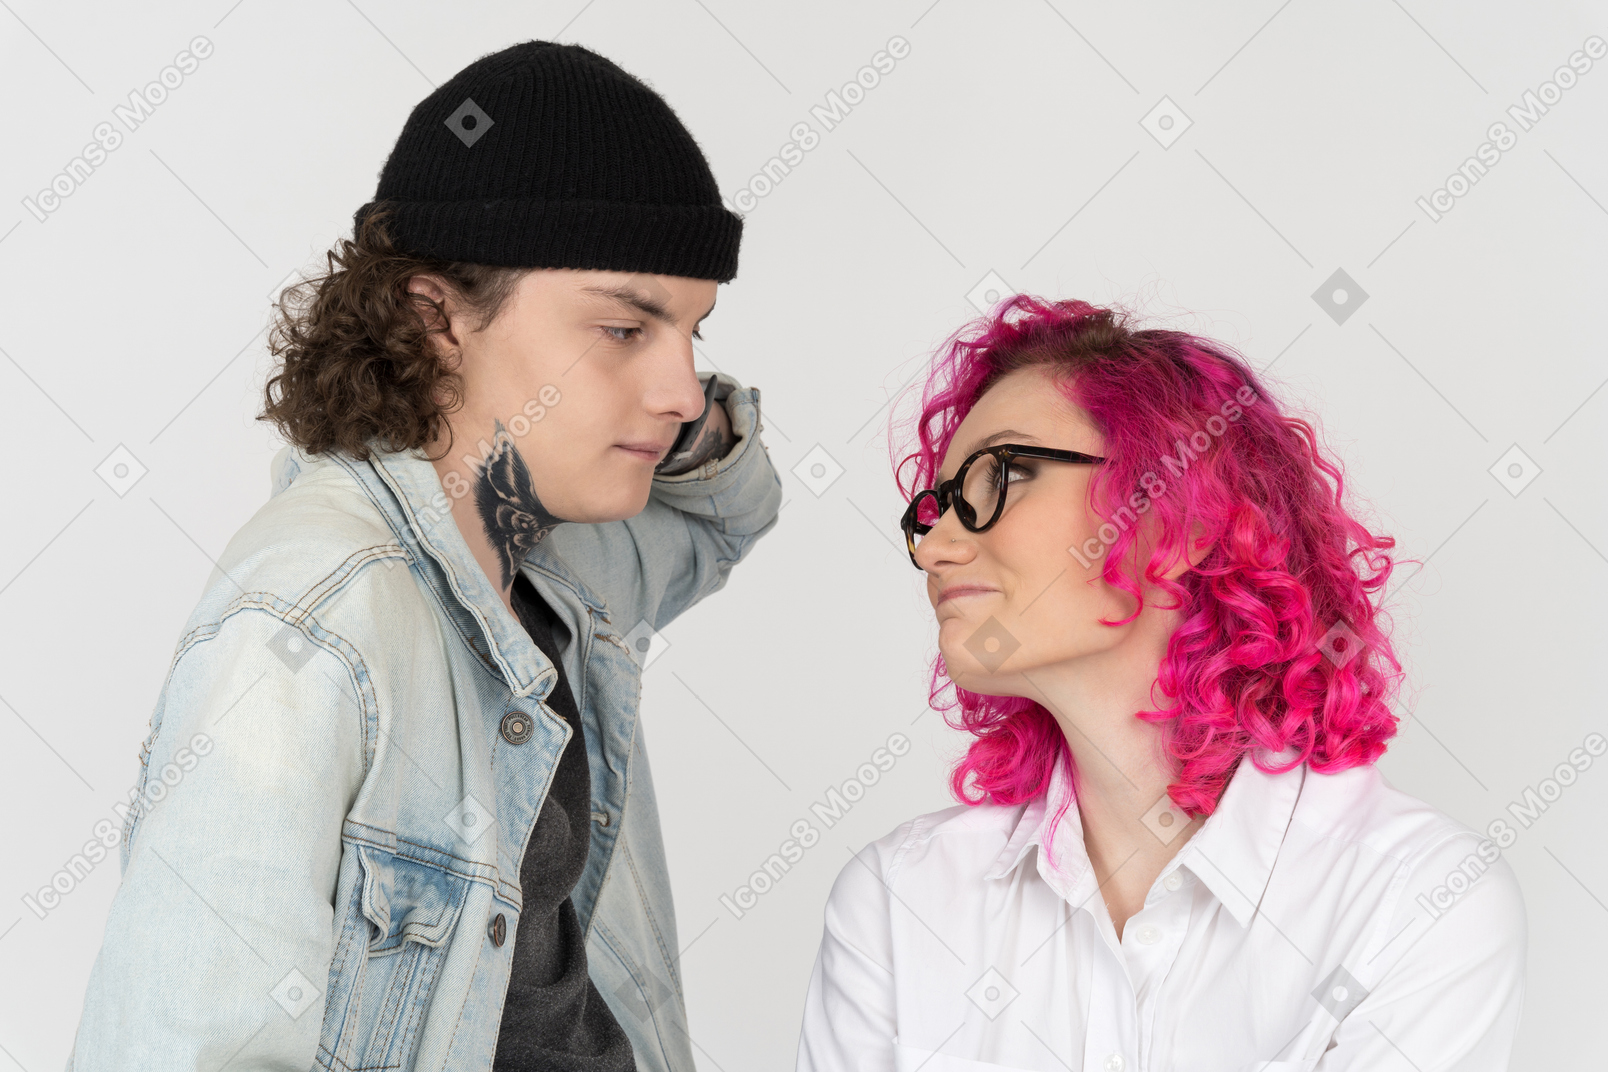 Young man and woman watching each other with a shy